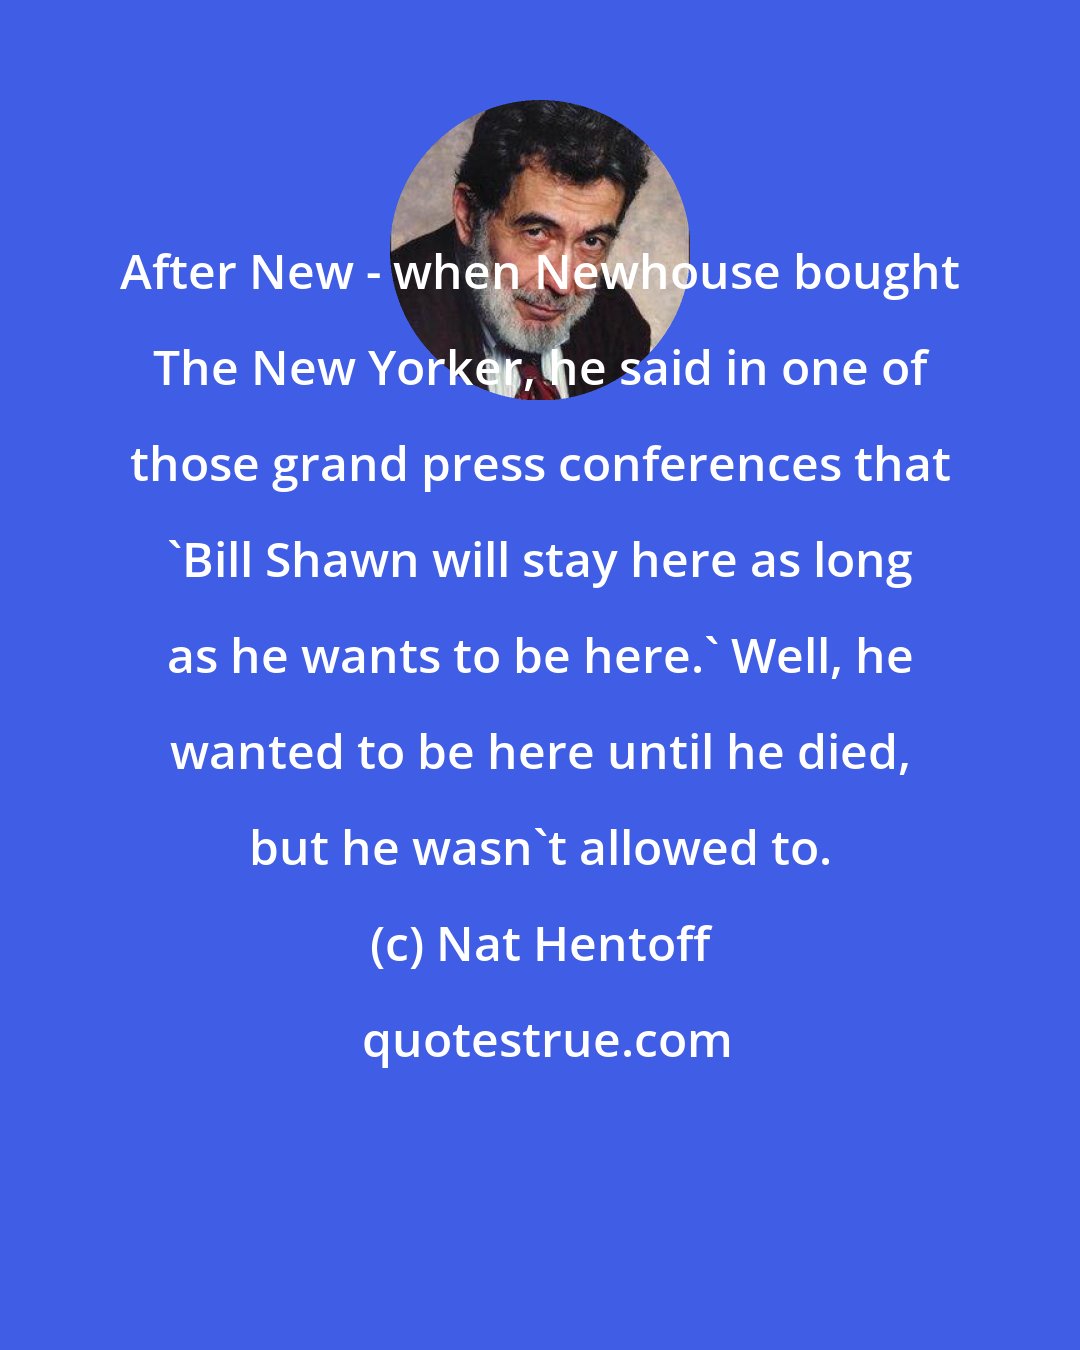 Nat Hentoff: After New - when Newhouse bought The New Yorker, he said in one of those grand press conferences that `Bill Shawn will stay here as long as he wants to be here.' Well, he wanted to be here until he died, but he wasn't allowed to.